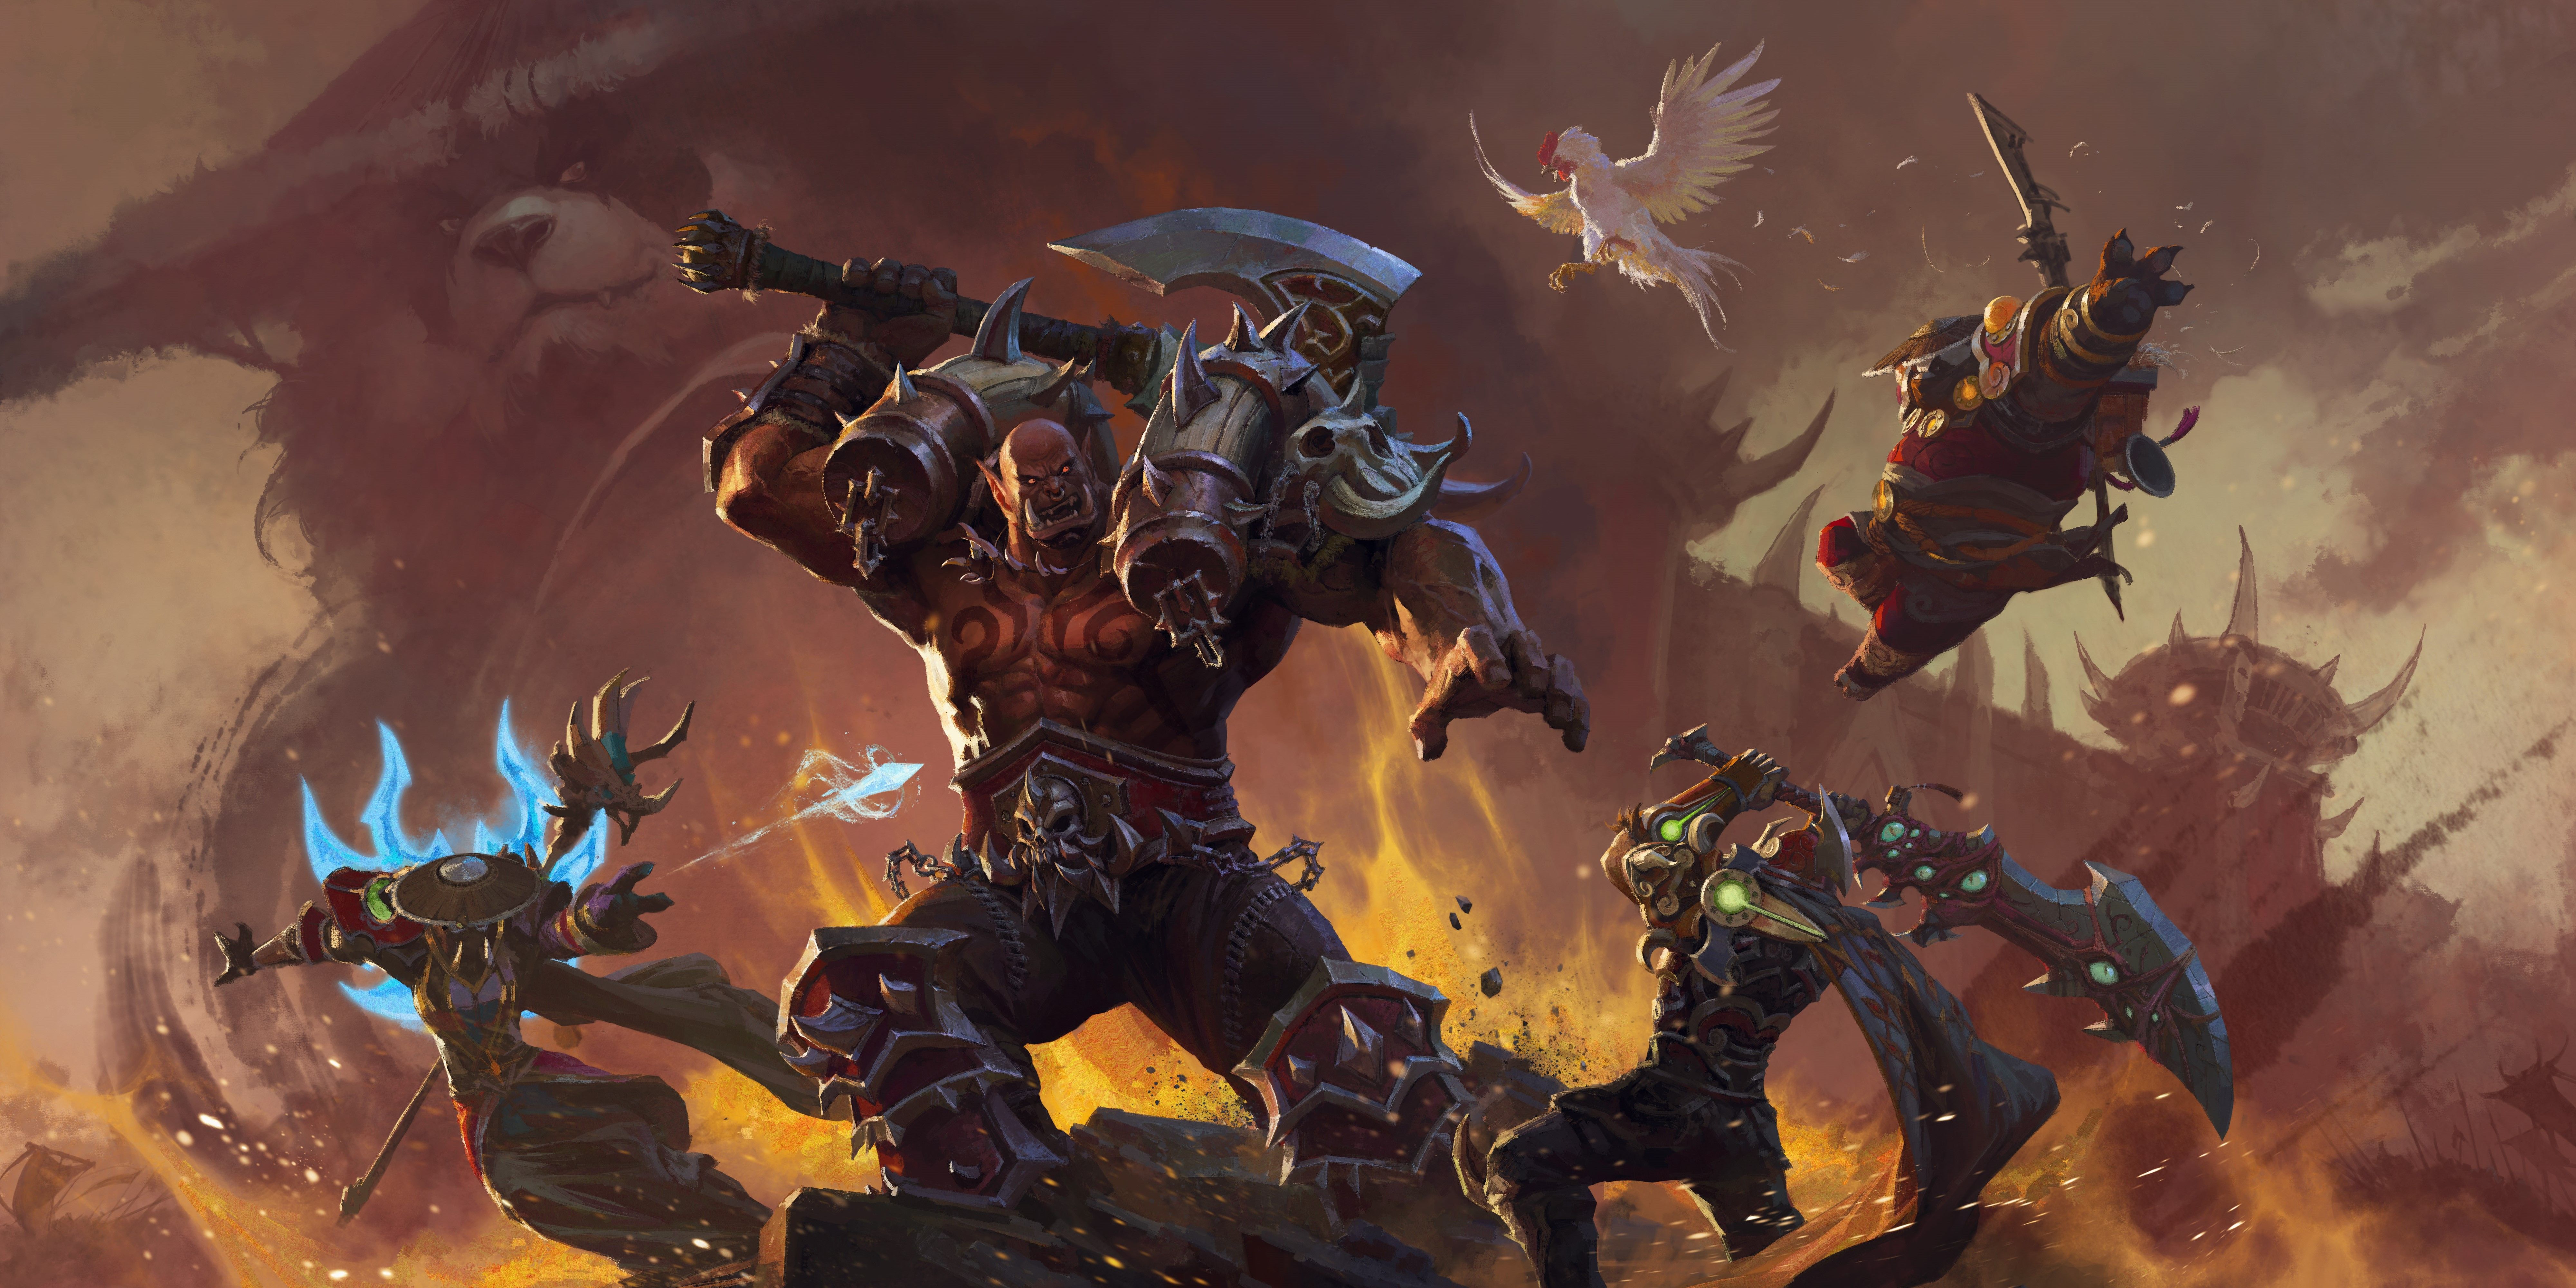 garrosh hellscream fighting WoW characters with chen behind him